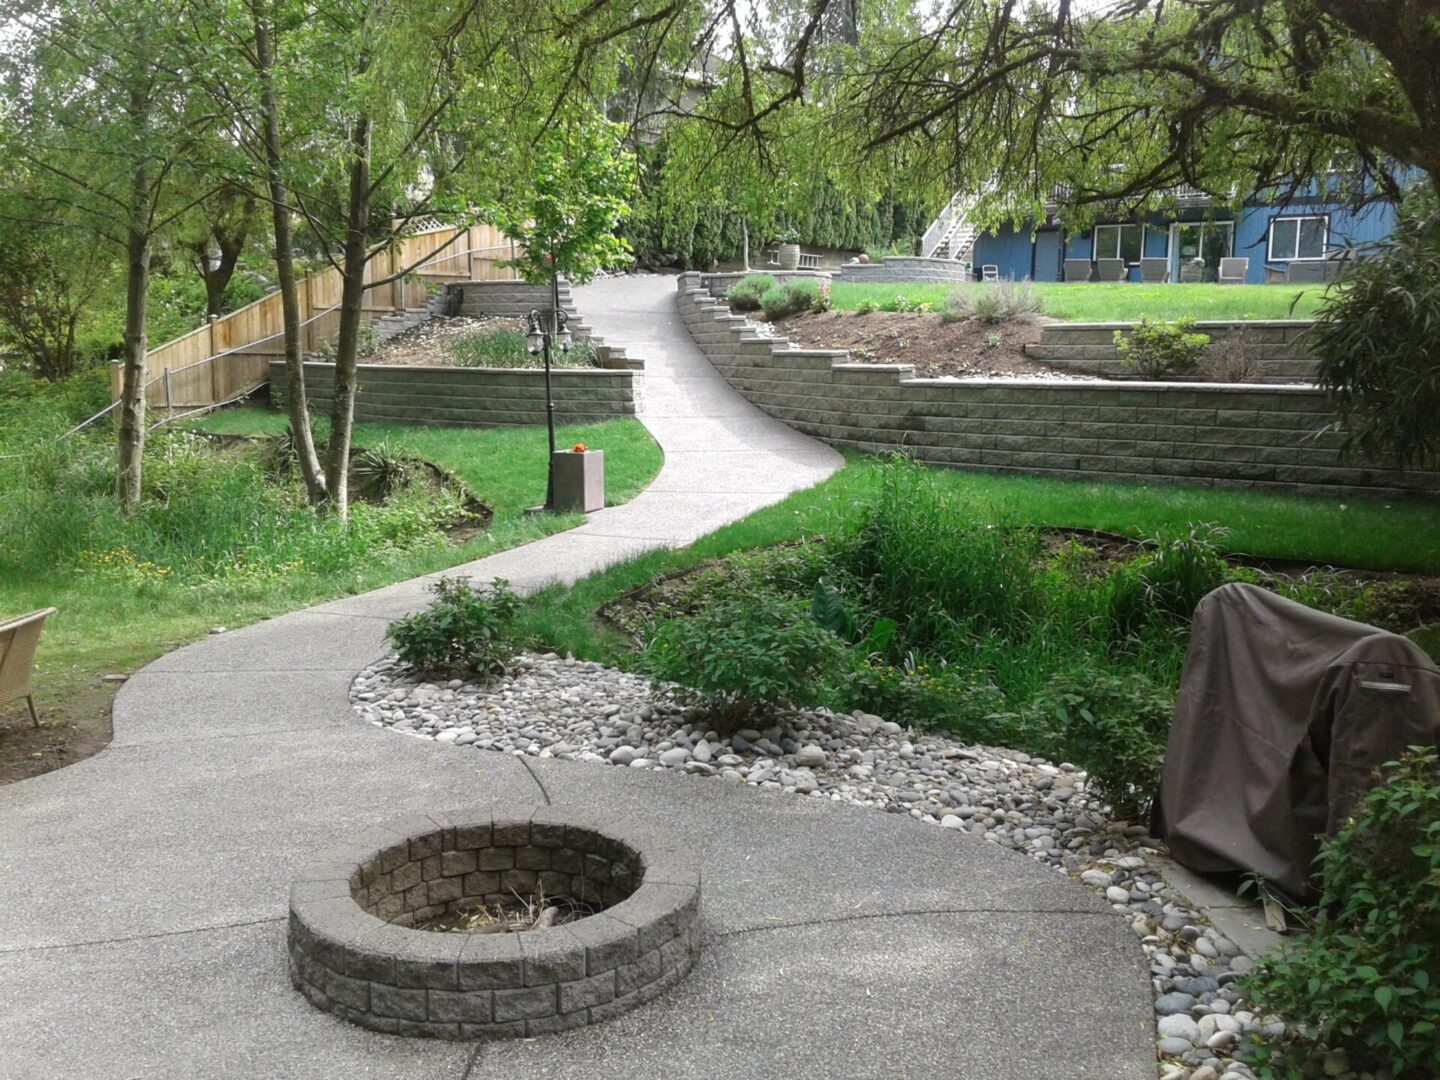 A winding concrete pathway through a landscaped garden with green trees, grass, and a small stone-lined pit in the foreground.